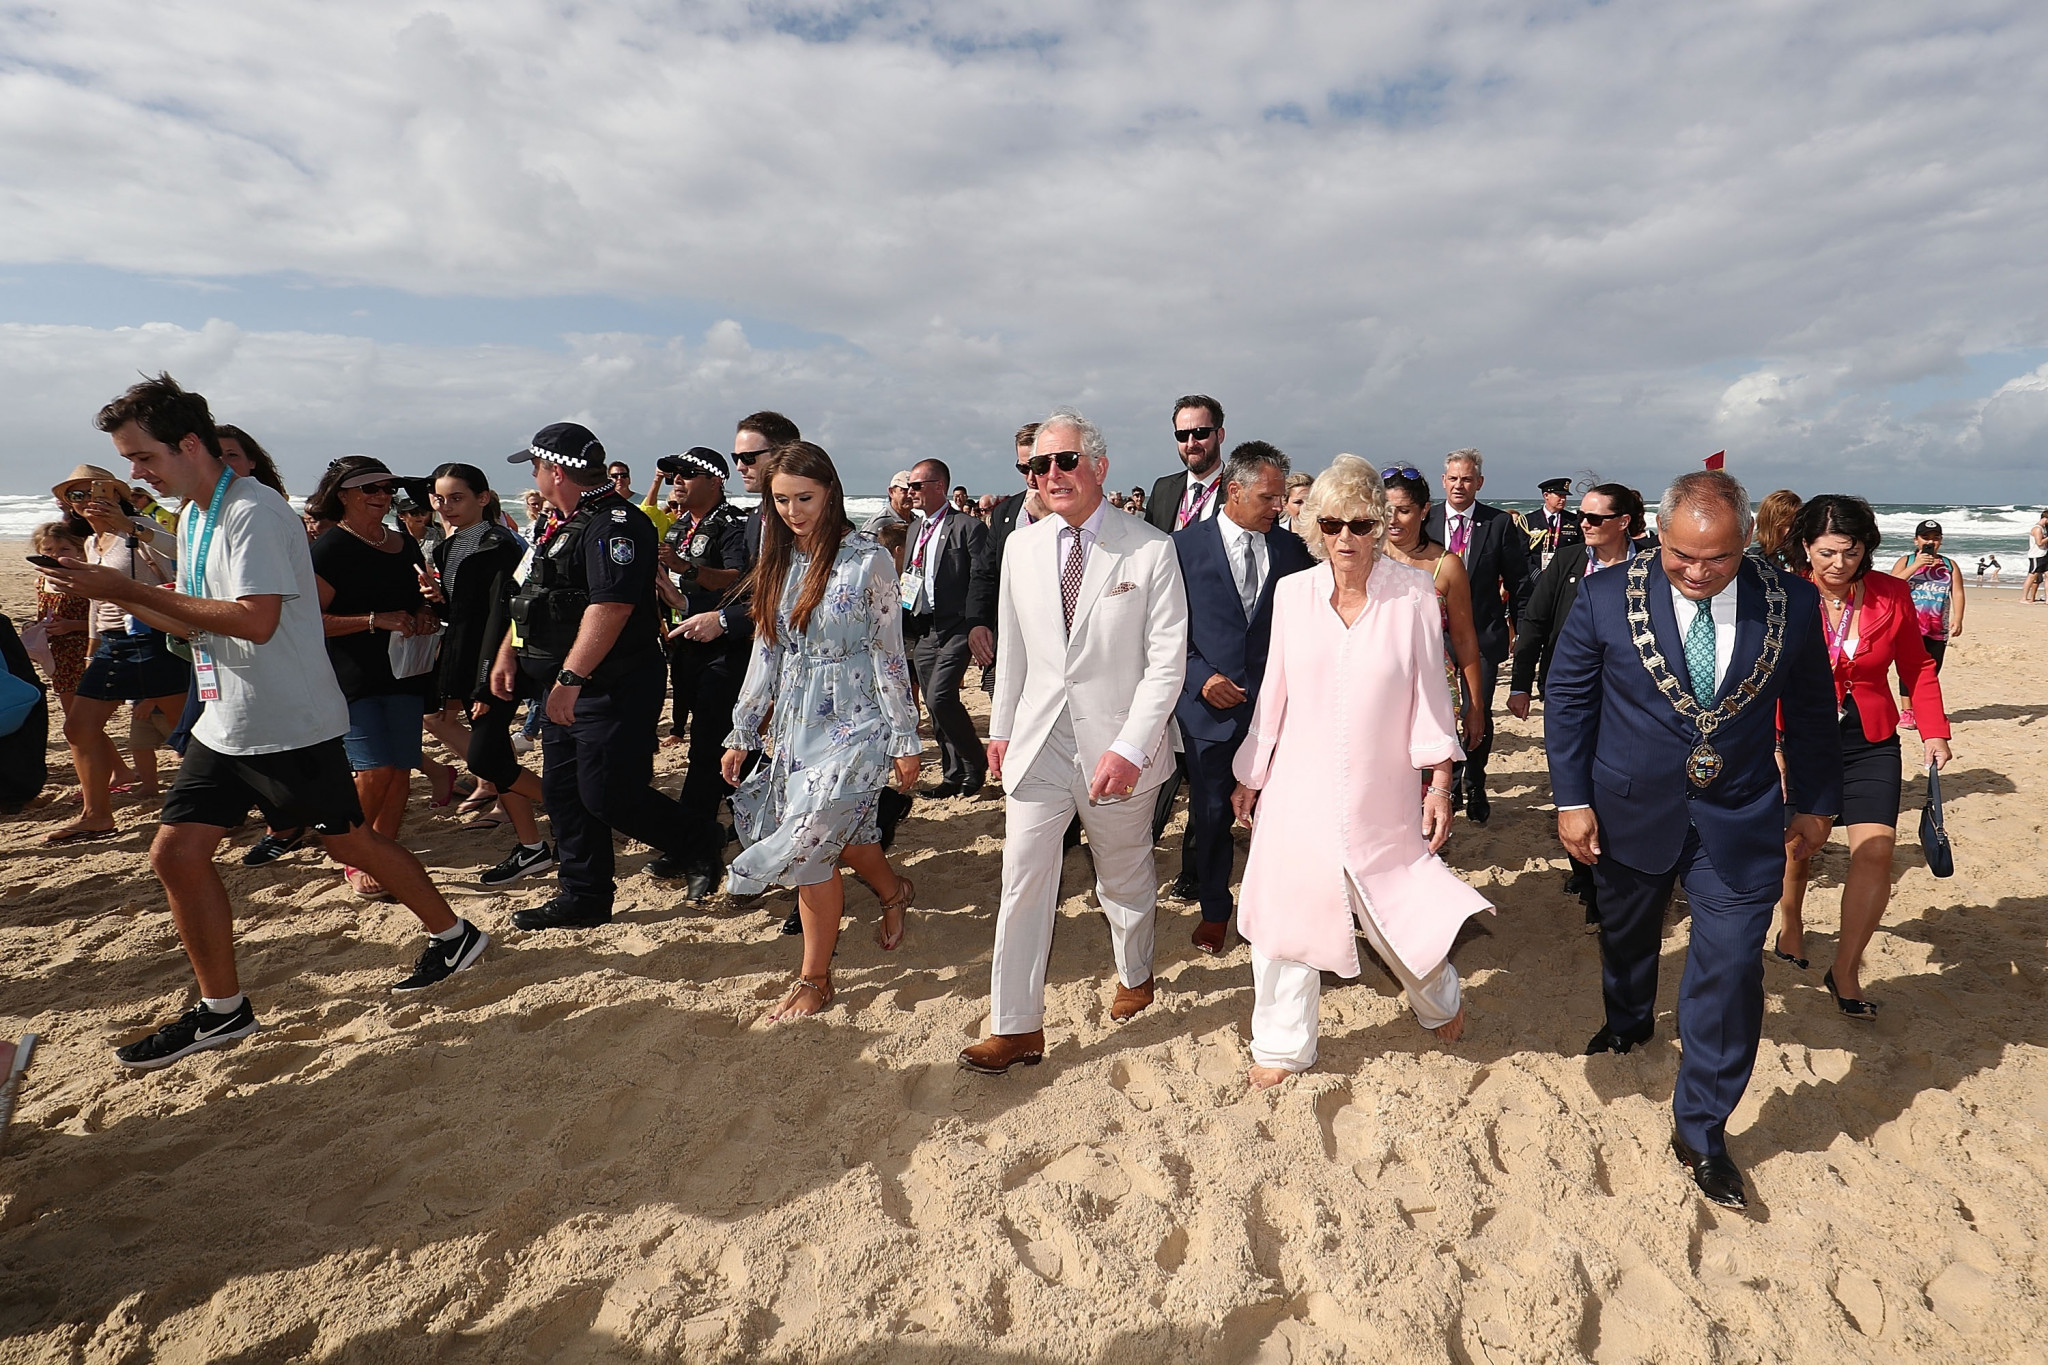 He and his wife Camilla, the Duchess of Cornwall, had earlier visited Broadbeach on the Gold Coast after touring the Commonwealth Games Athletes' Village and speaking to Prime Minister Malcolm Turnbull ©Getty Images